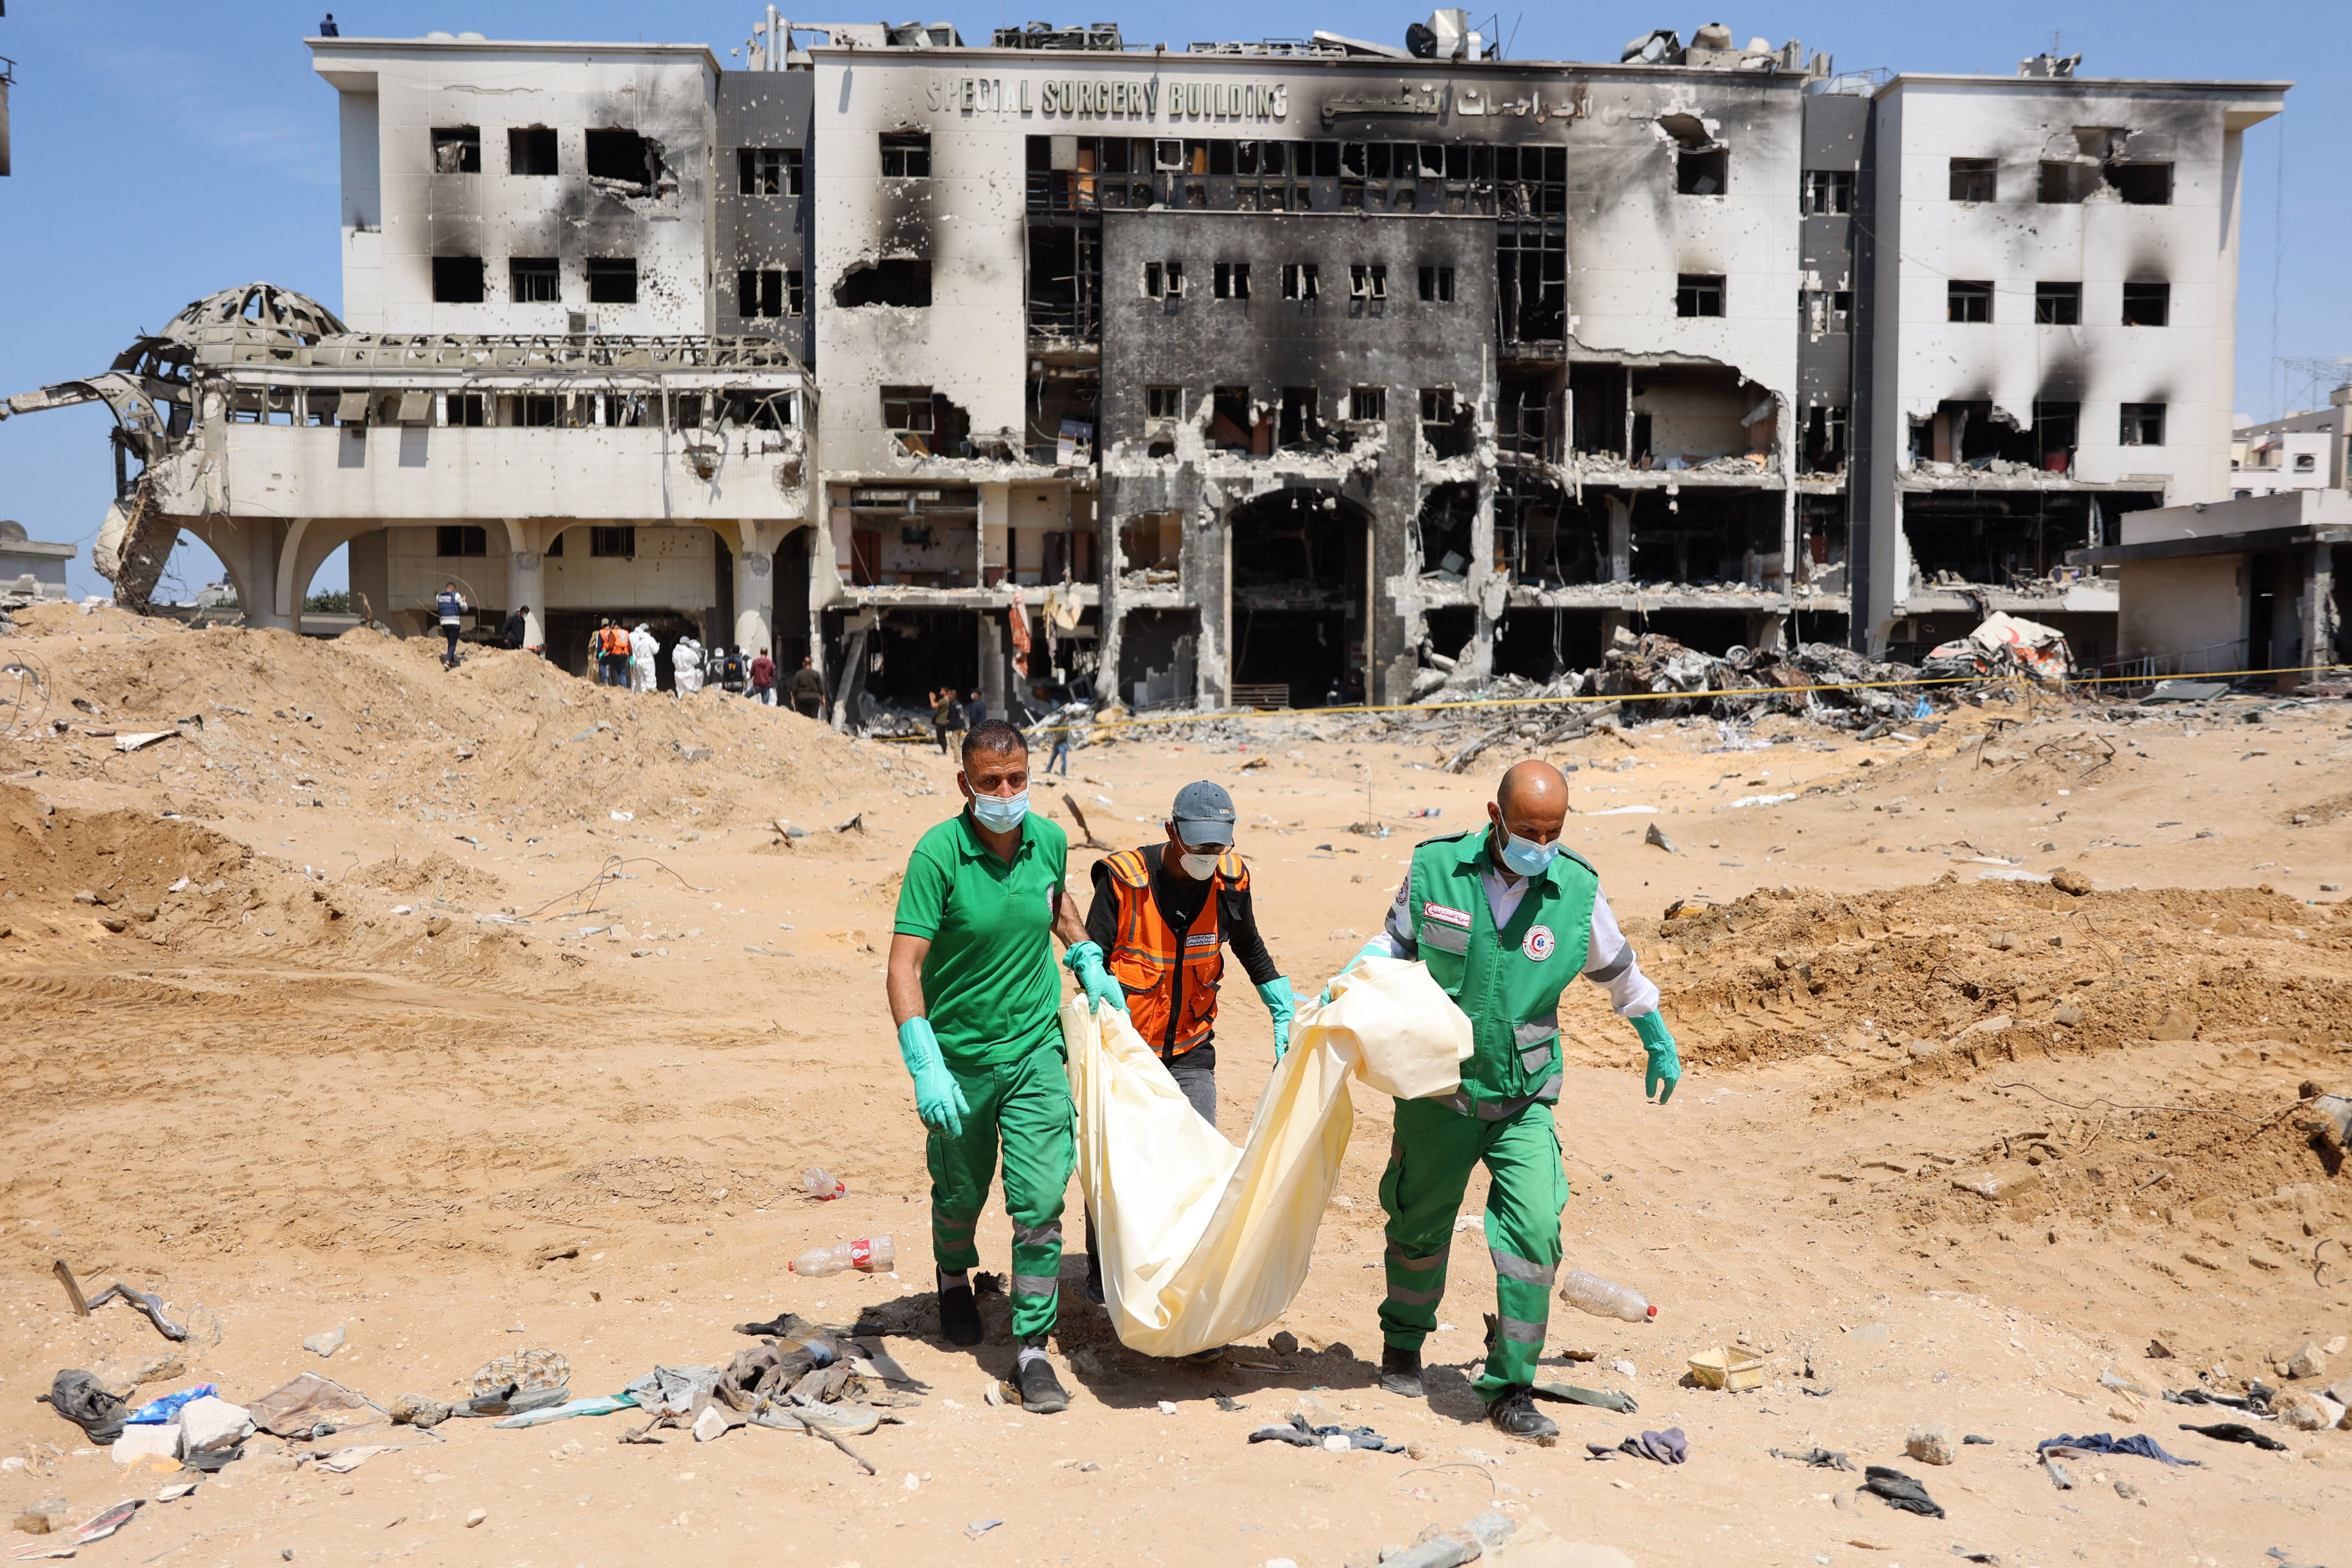 Palestinian forensic and civil defense workers recover human remains at the grounds of Al-Shifa Hospital, Gaza, on April 8.